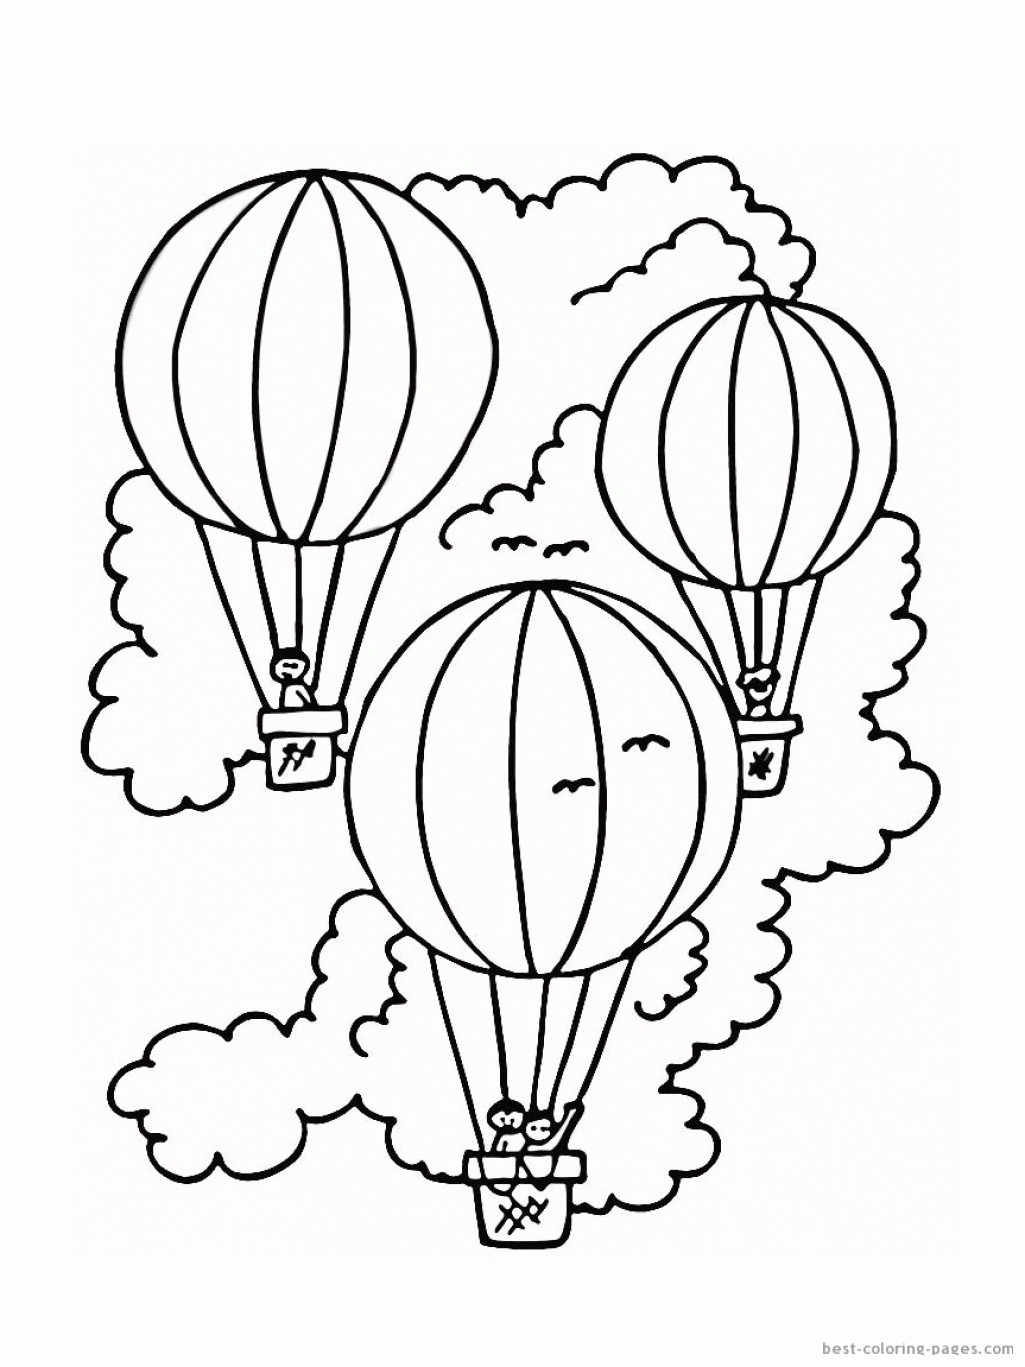 Download Air Transportation Vehicle Coloring Page - Coloring Home